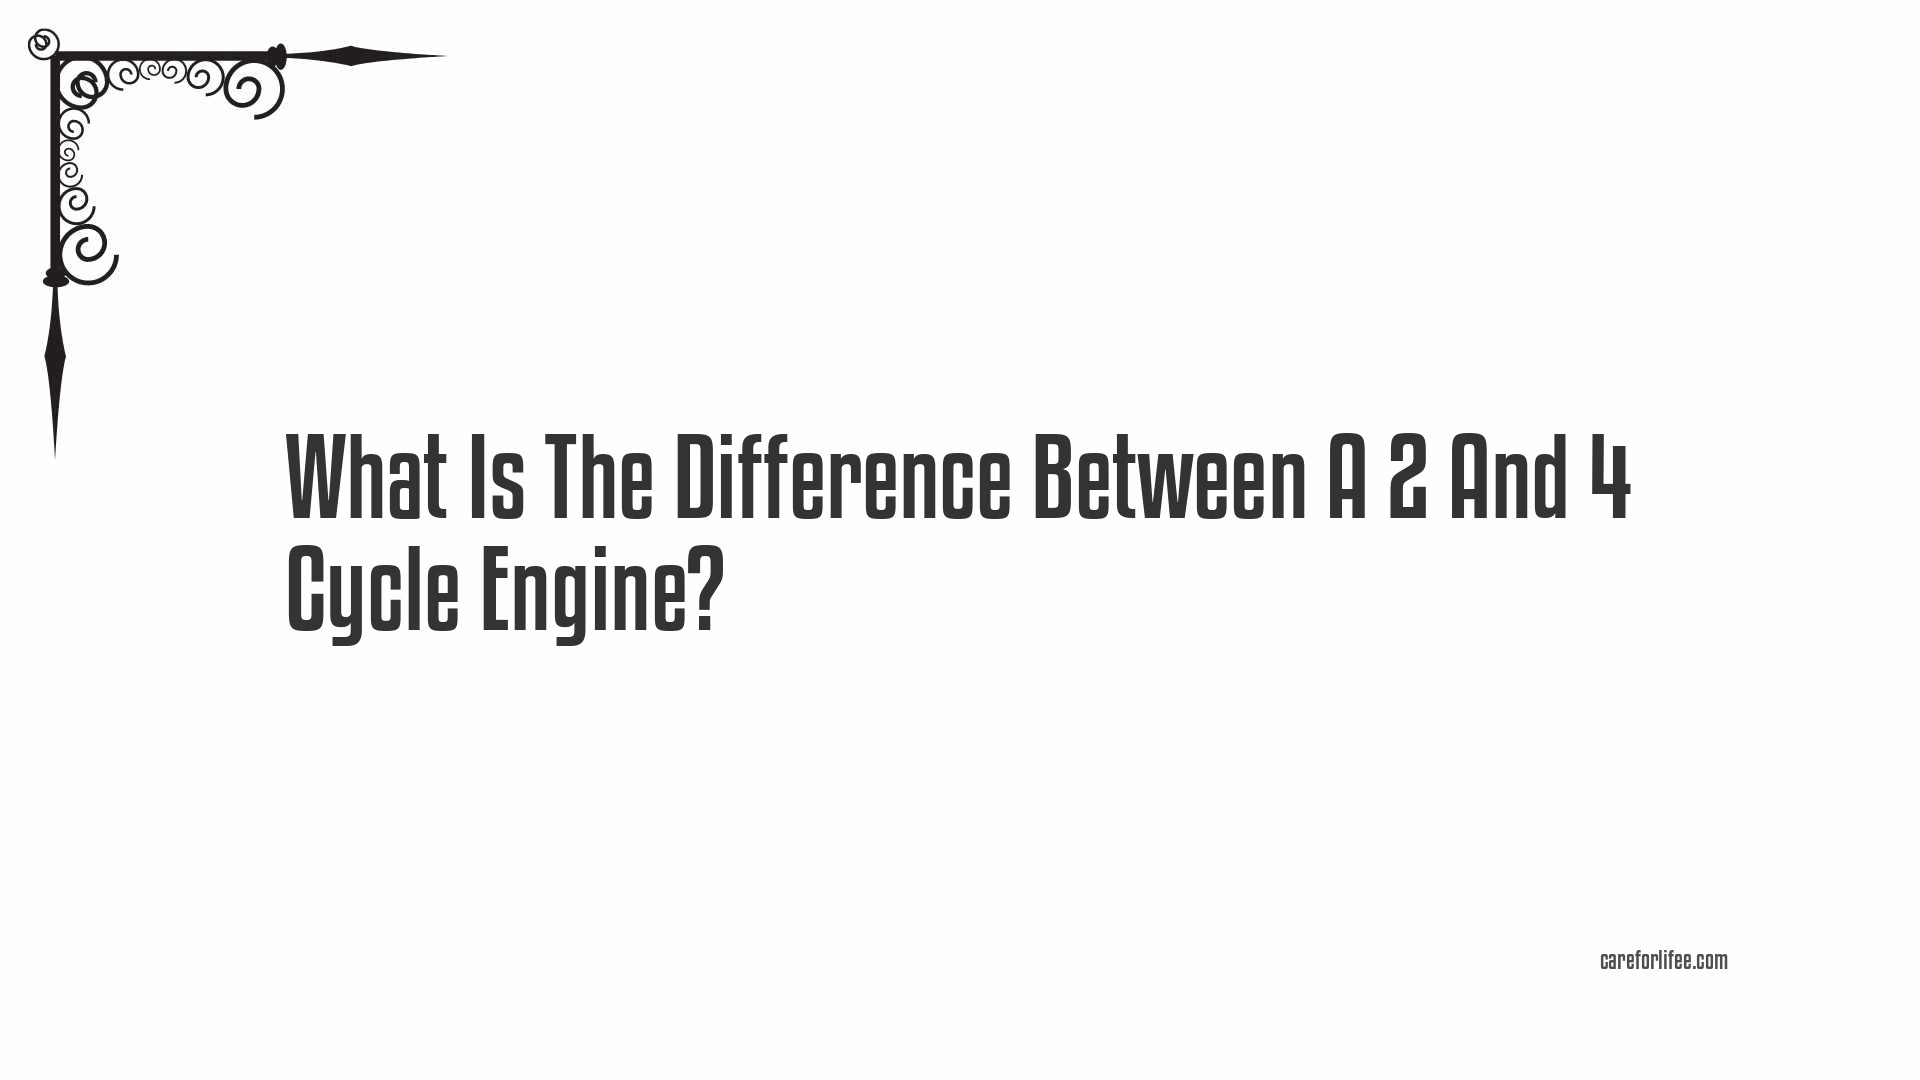 What Is The Difference Between A 2 And 4 Cycle Engine?